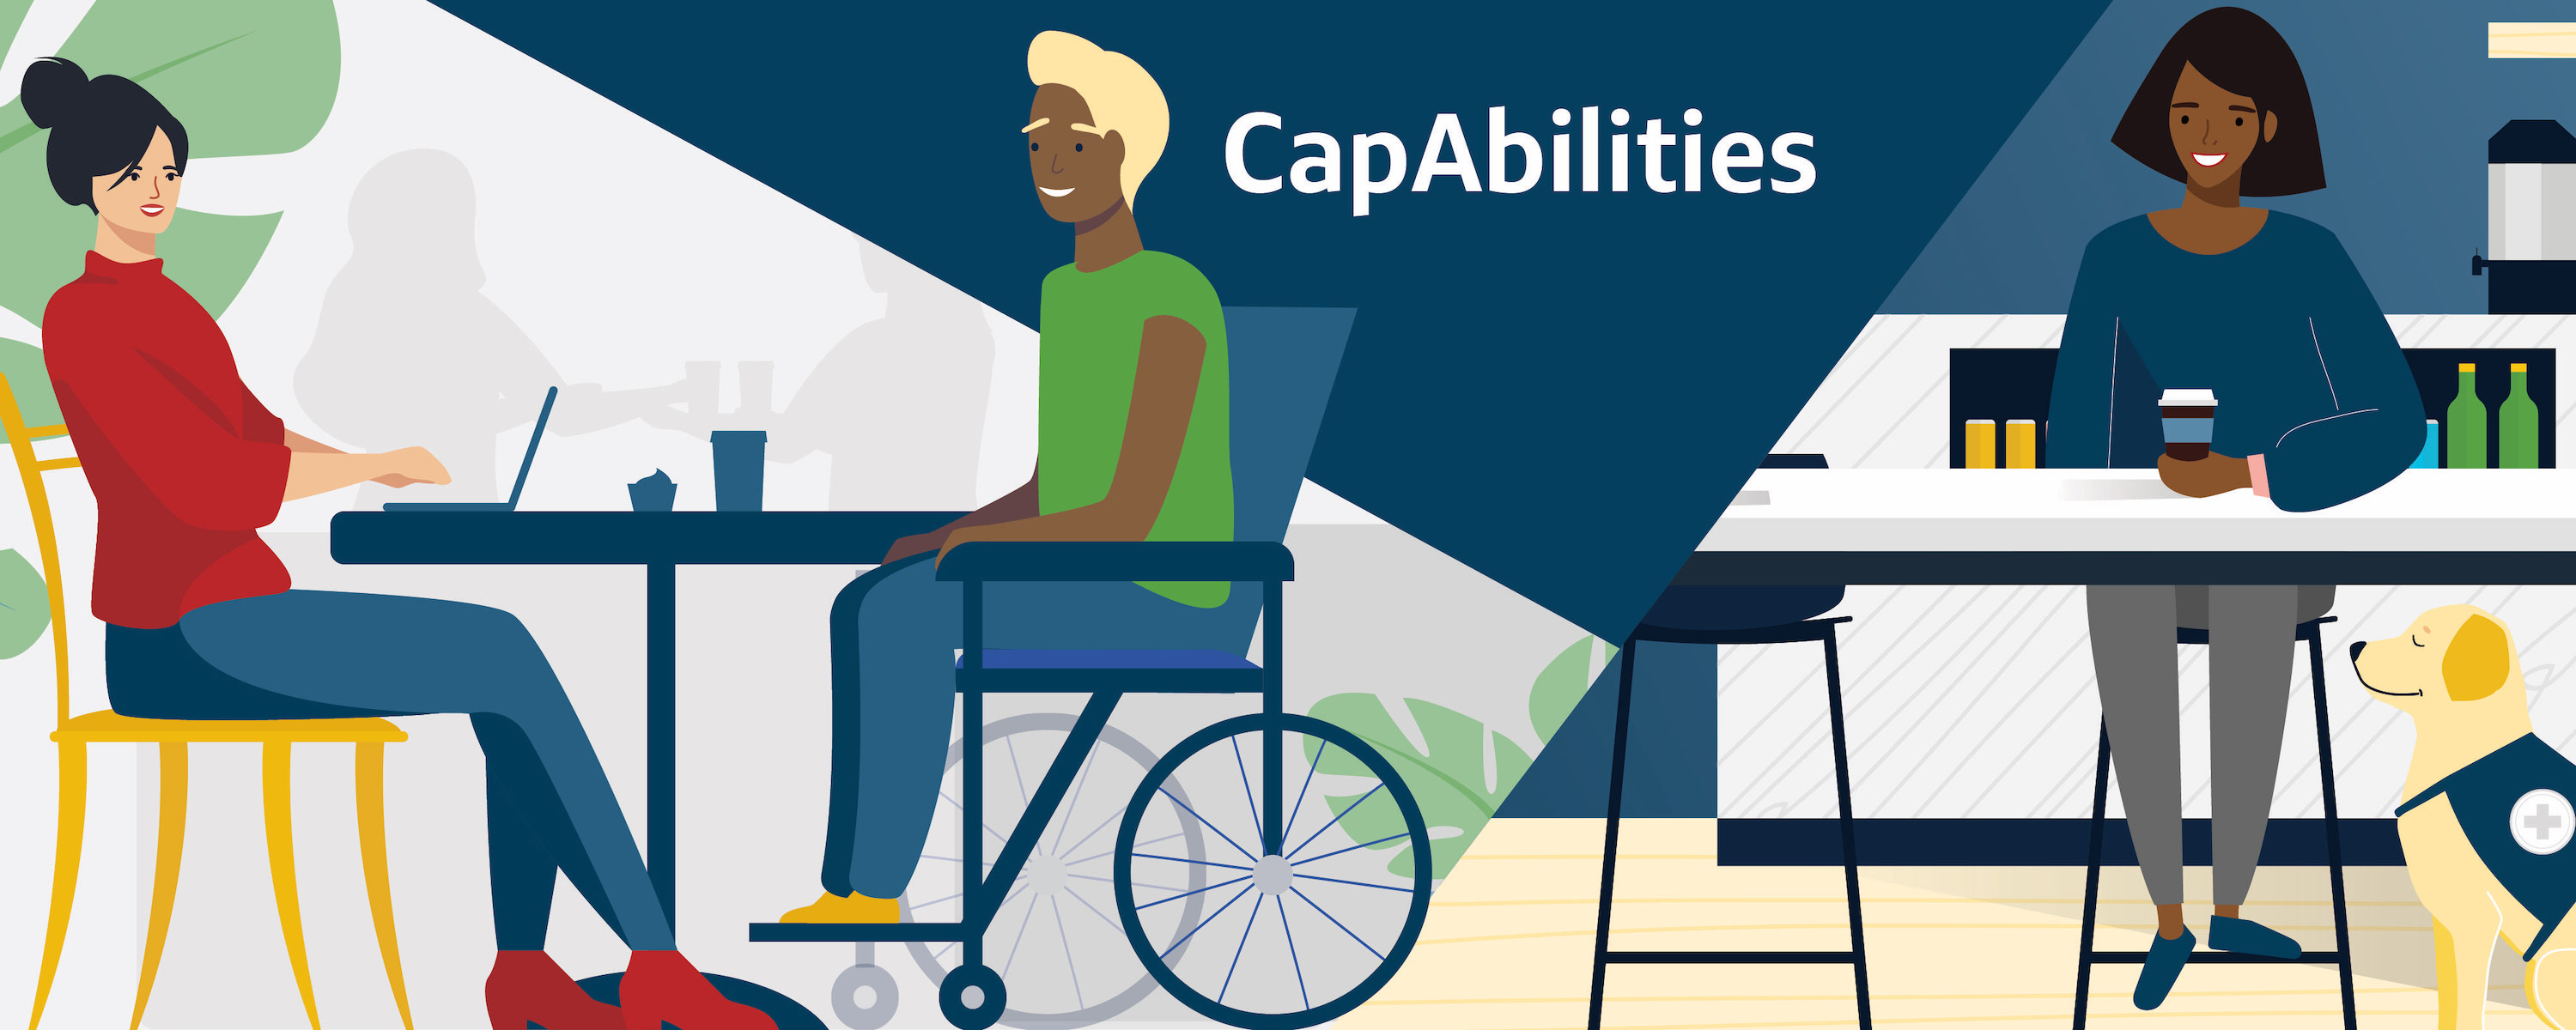 Illustration of 3 Capital One associates as well as a service dog sitting and working, with the title 'CapAbilities'